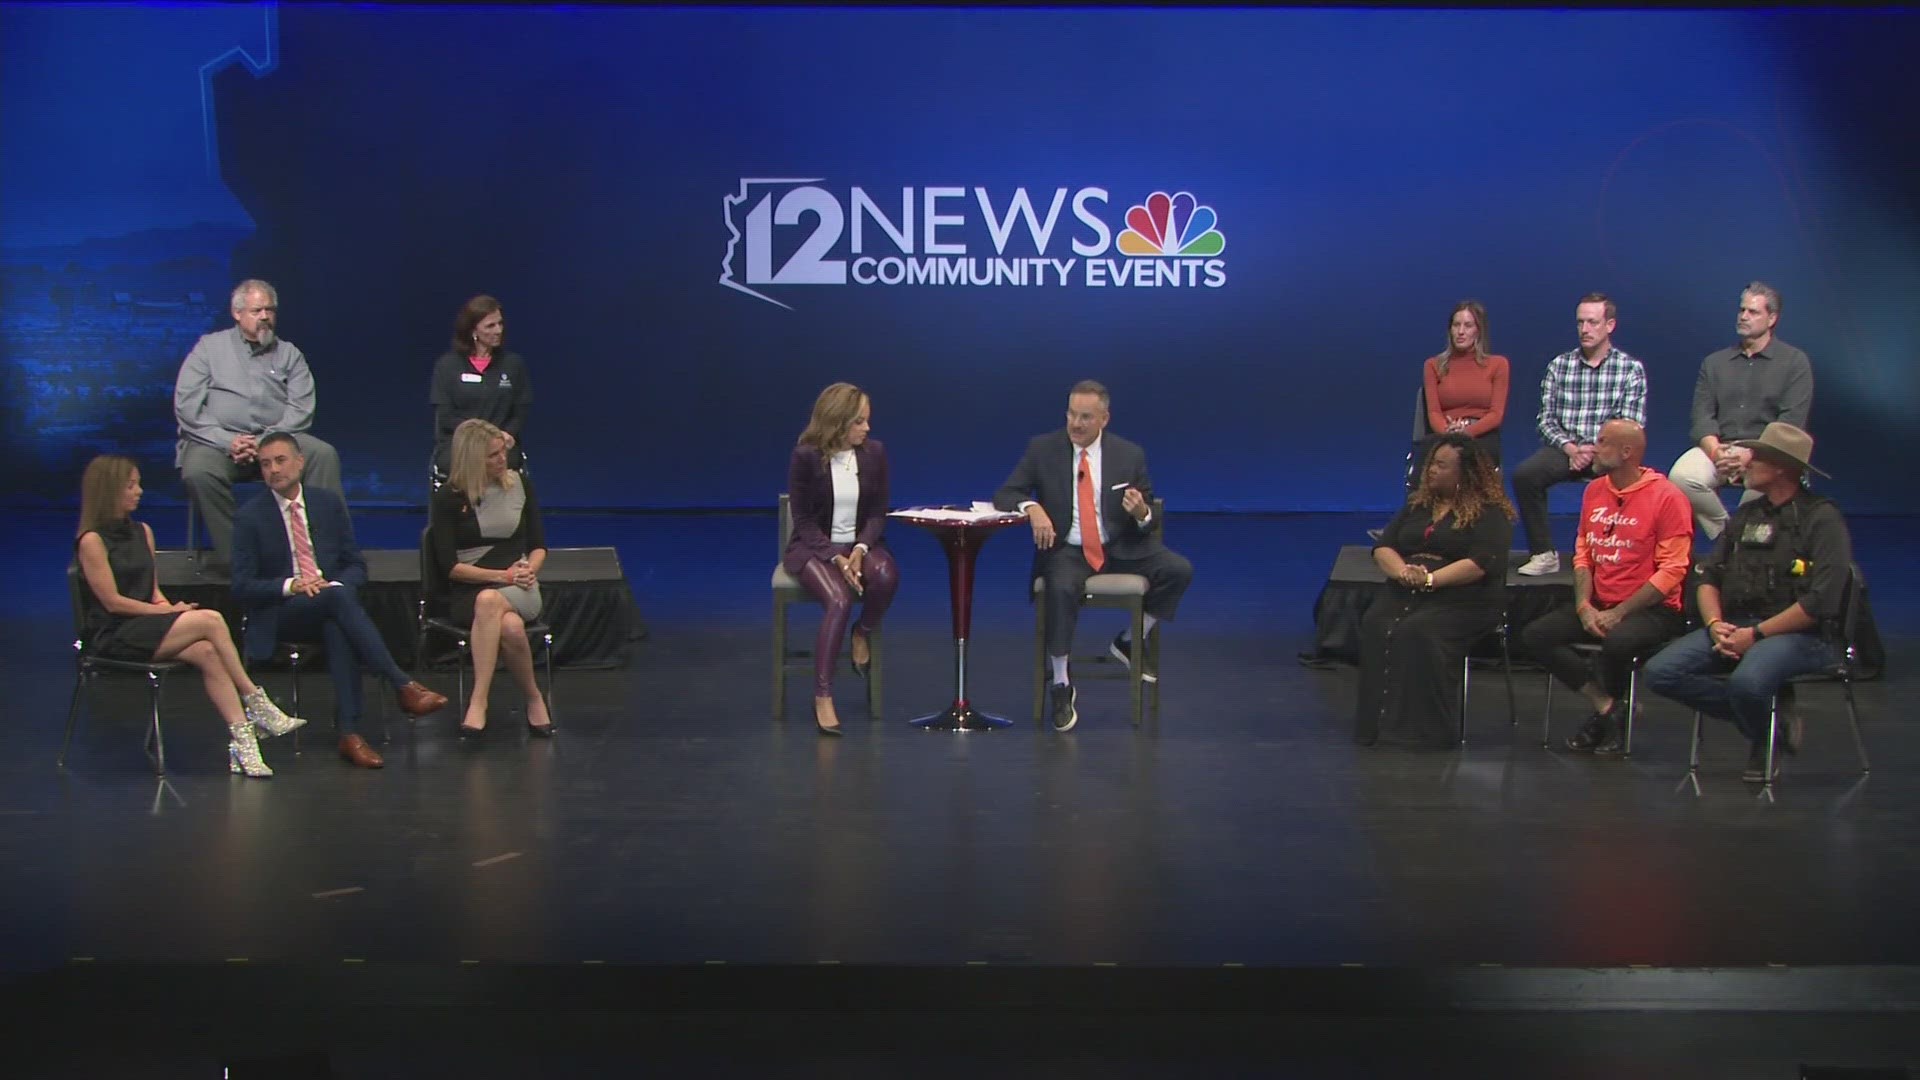 12News is gearing up to host its 2nd Town Hall on teen violence in the Valley.